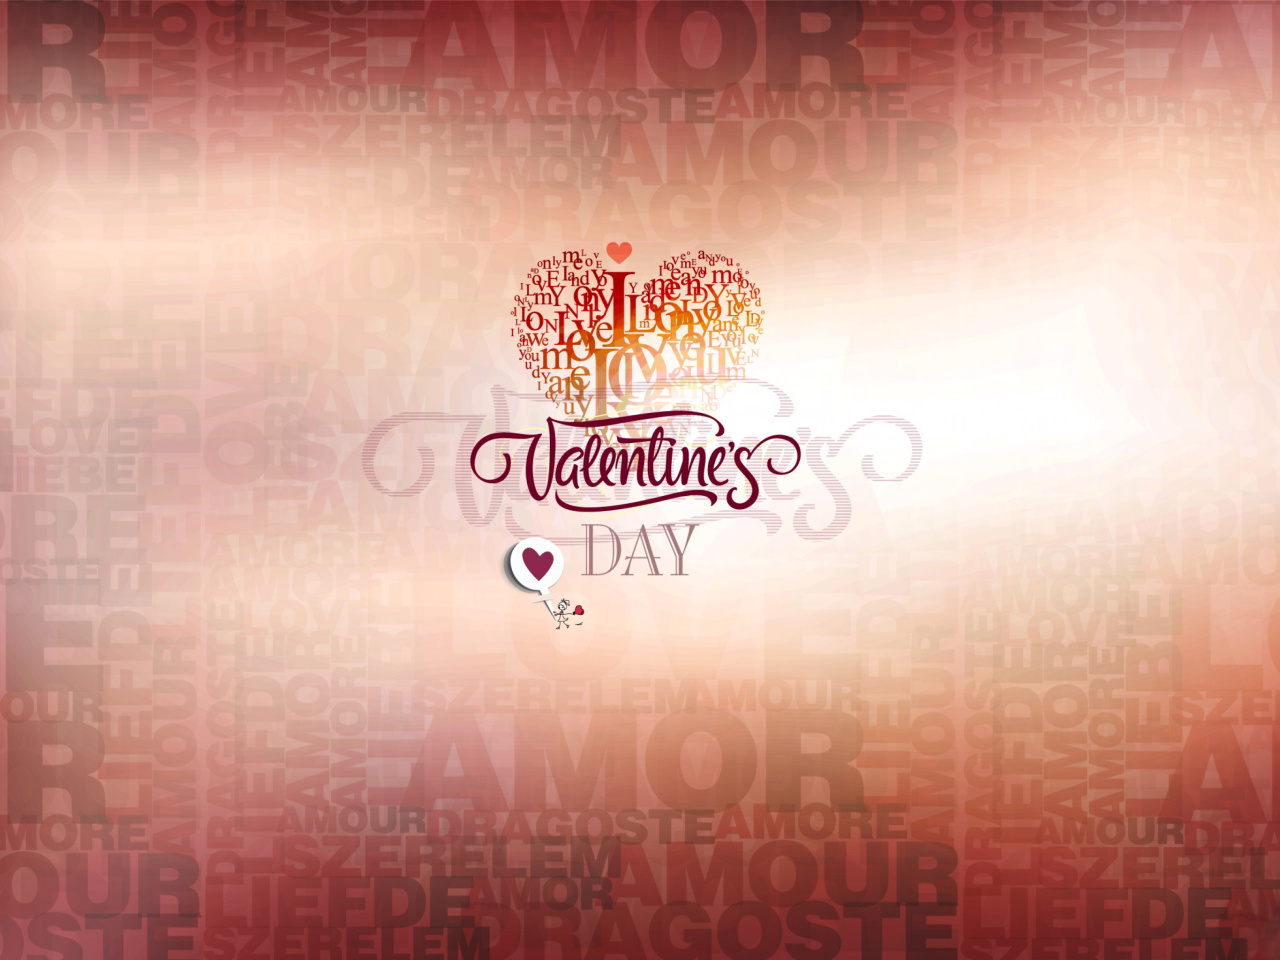 February 14 Valentines Day wallpaper 1280x960